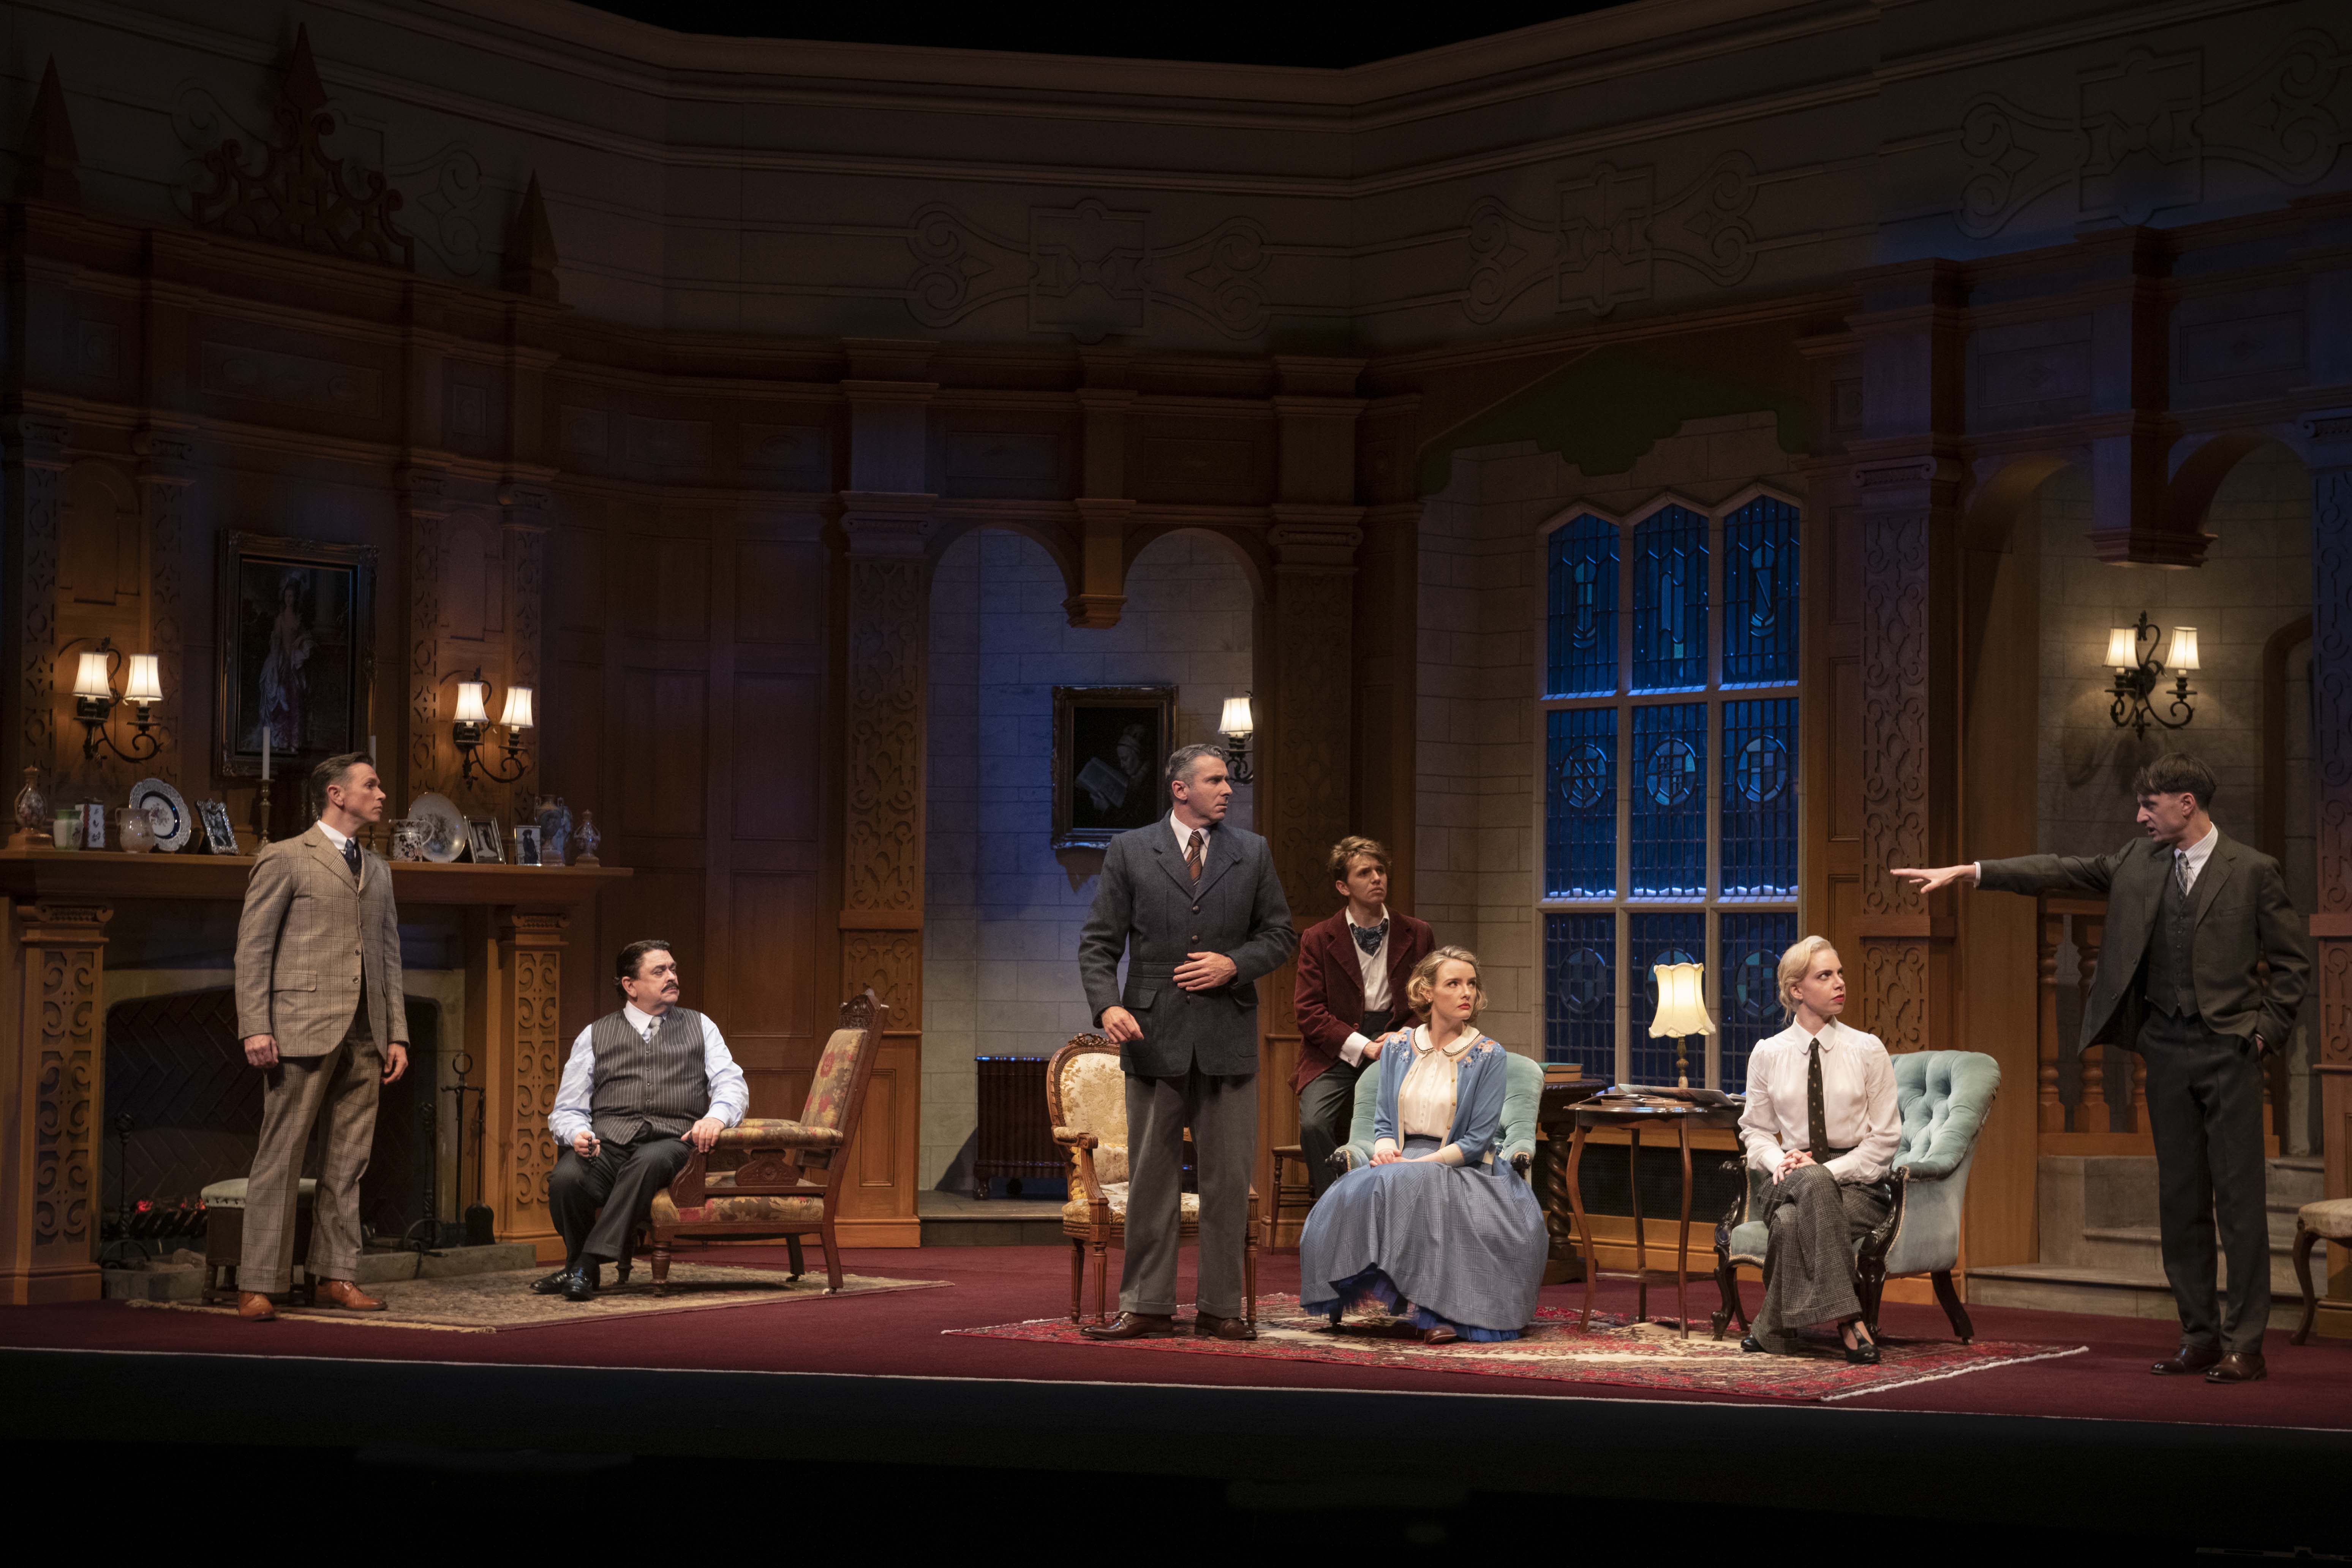 The 2022 Cast of Agatha Christie's The Mousetrap on stage.